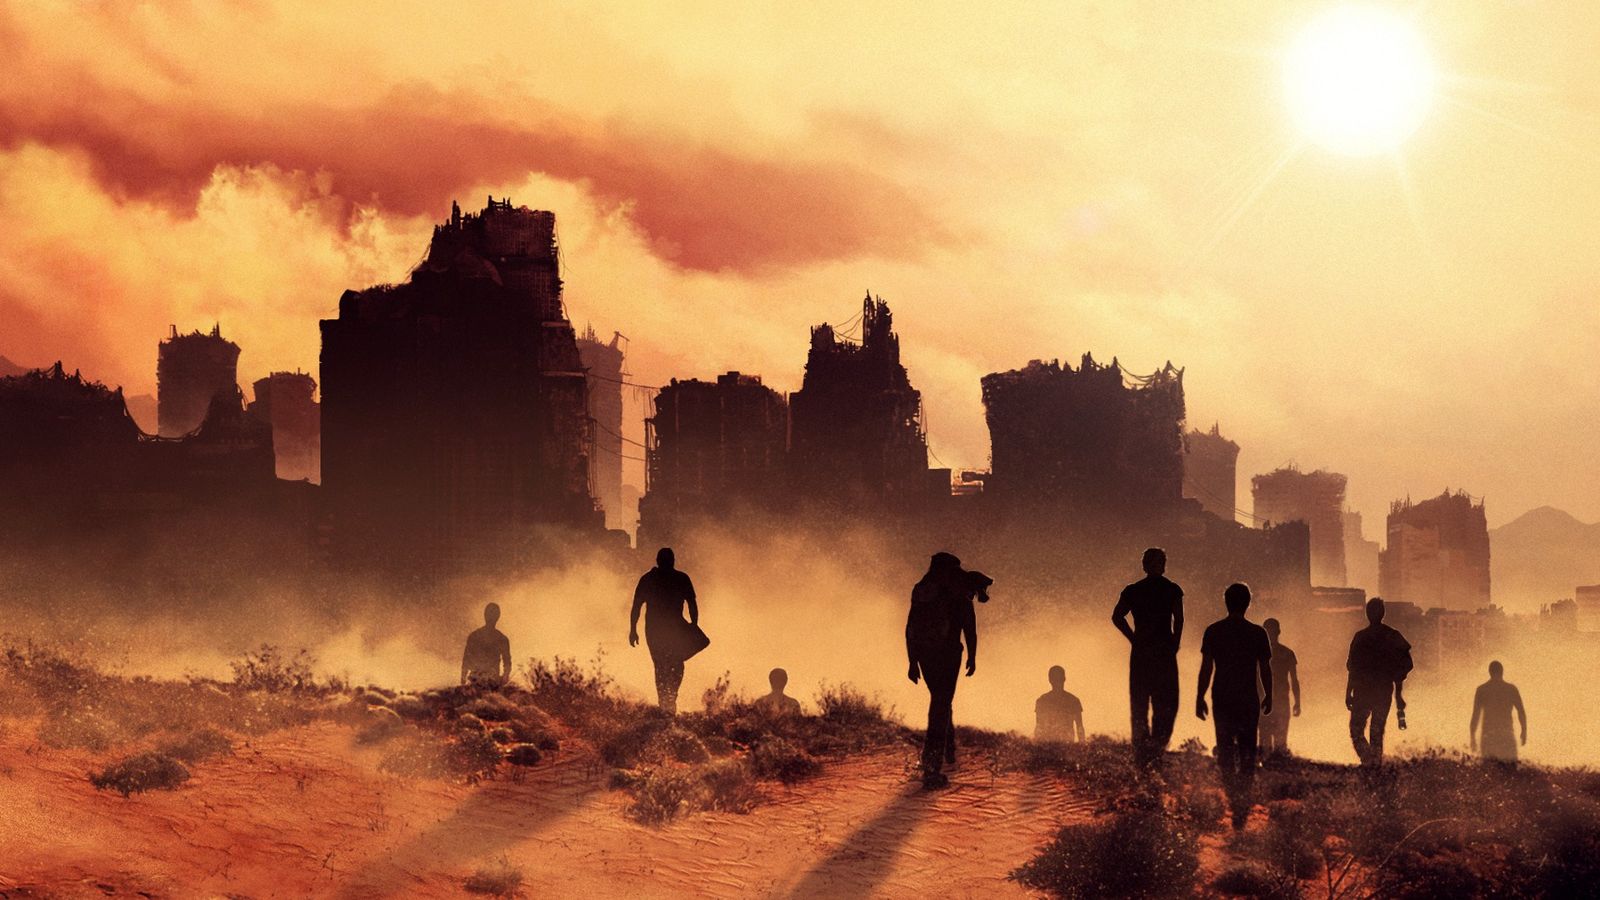 Maze Runner 2 Claims Top Spot At Box Office